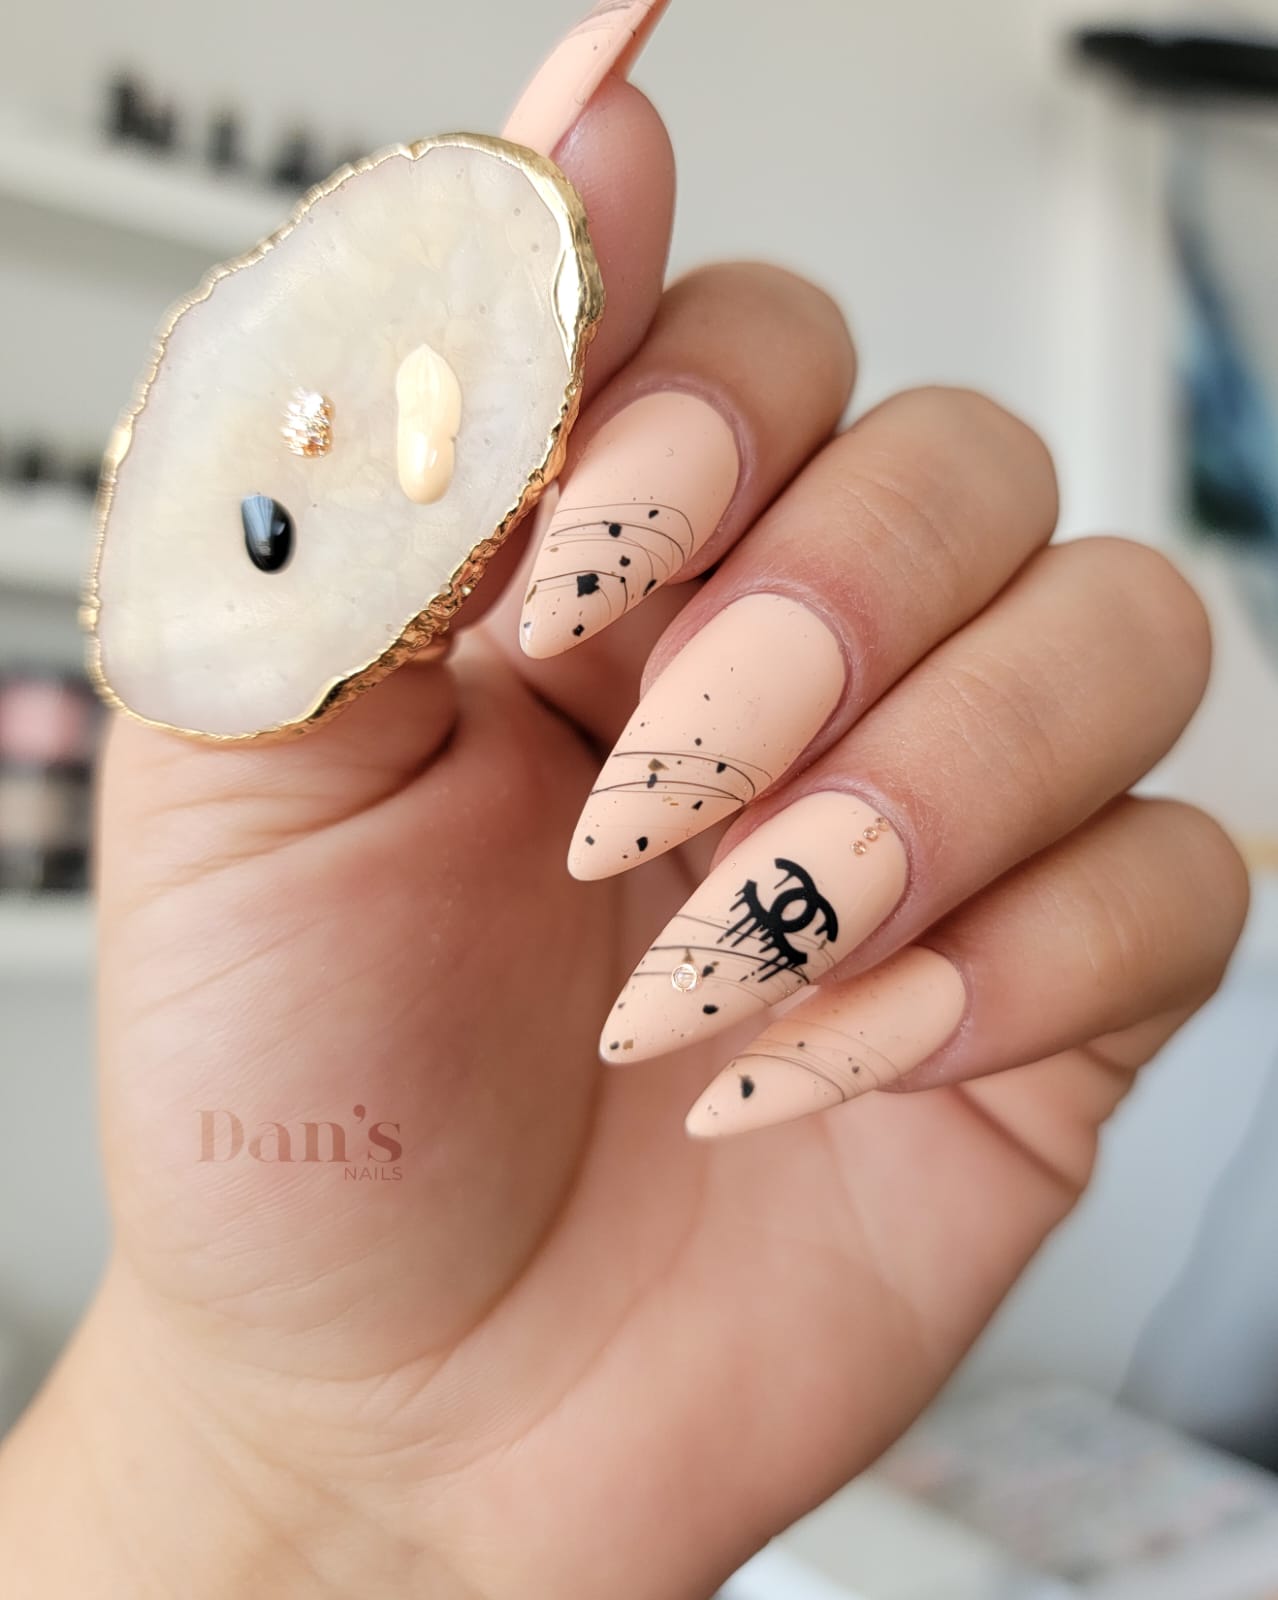 Buy Ultimate Luxury Logo Inspired Nail Art Stickers 6 Sheets Self